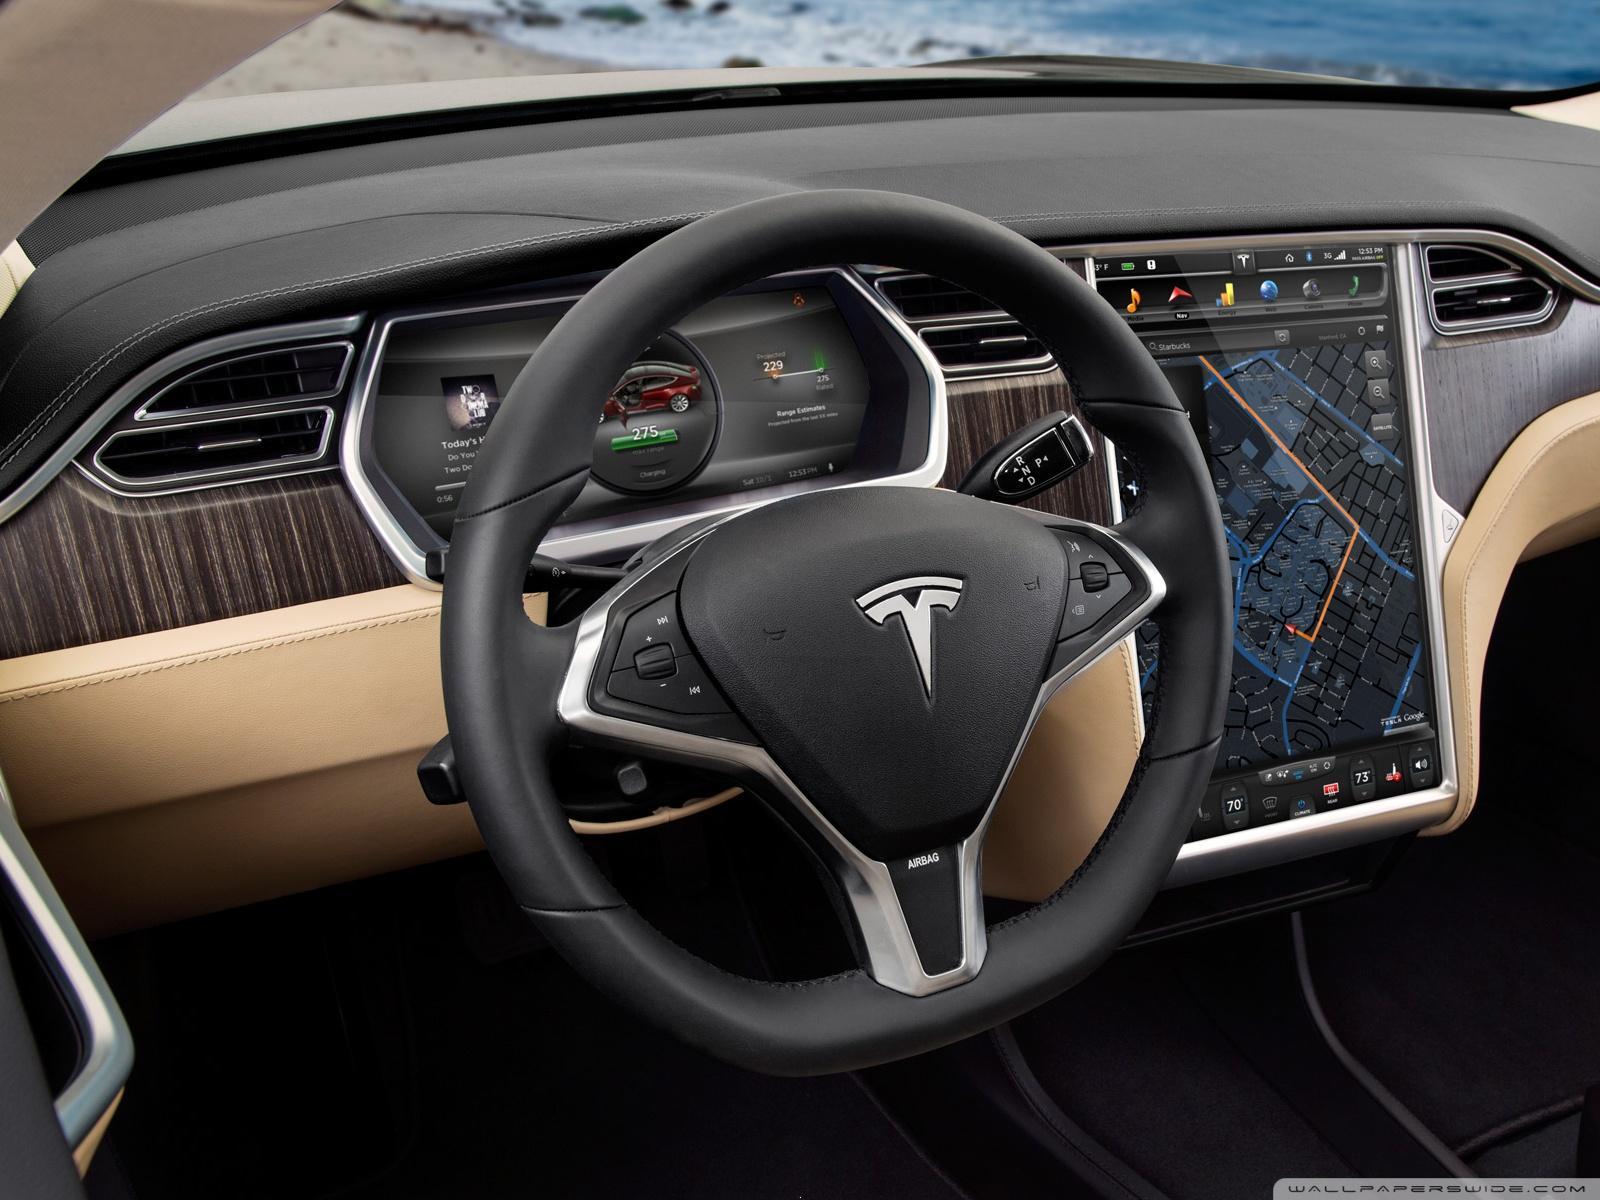 Download Tesla inside wallpaper - Cars wallpapers for your mobile cell phone